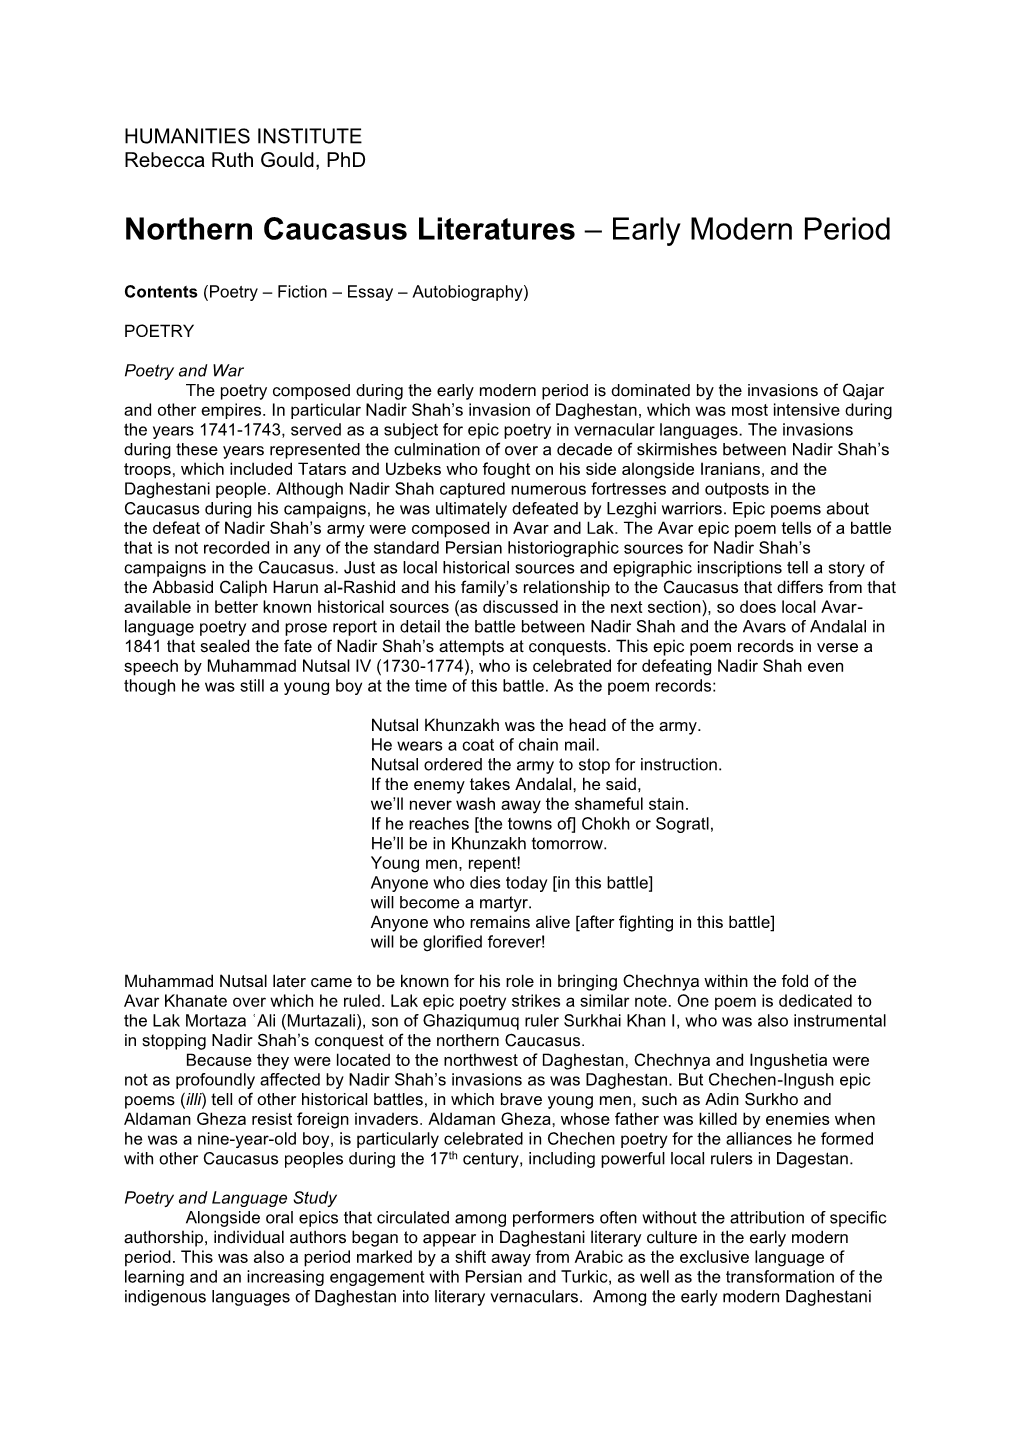 Northern Caucasus Literatures – Early Modern Period